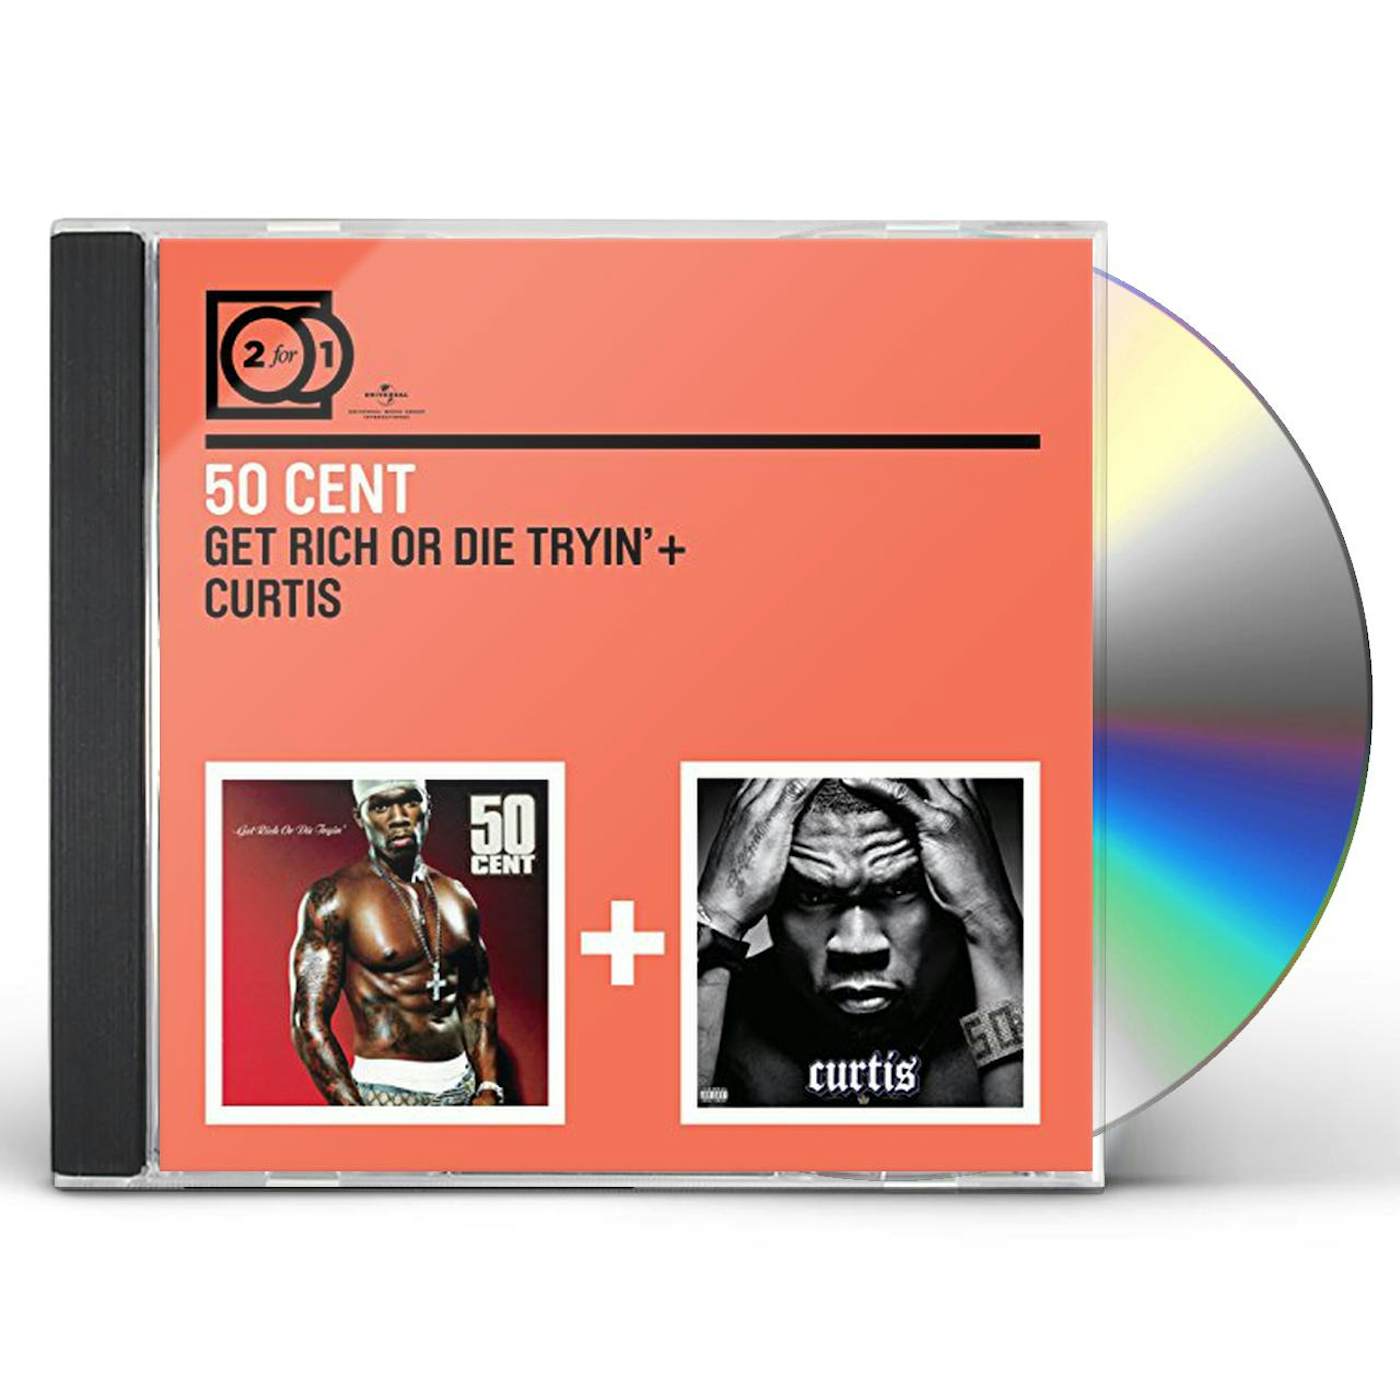 50 Cent - Curtis (Edited) CD (with Exclusive BET DVD) 